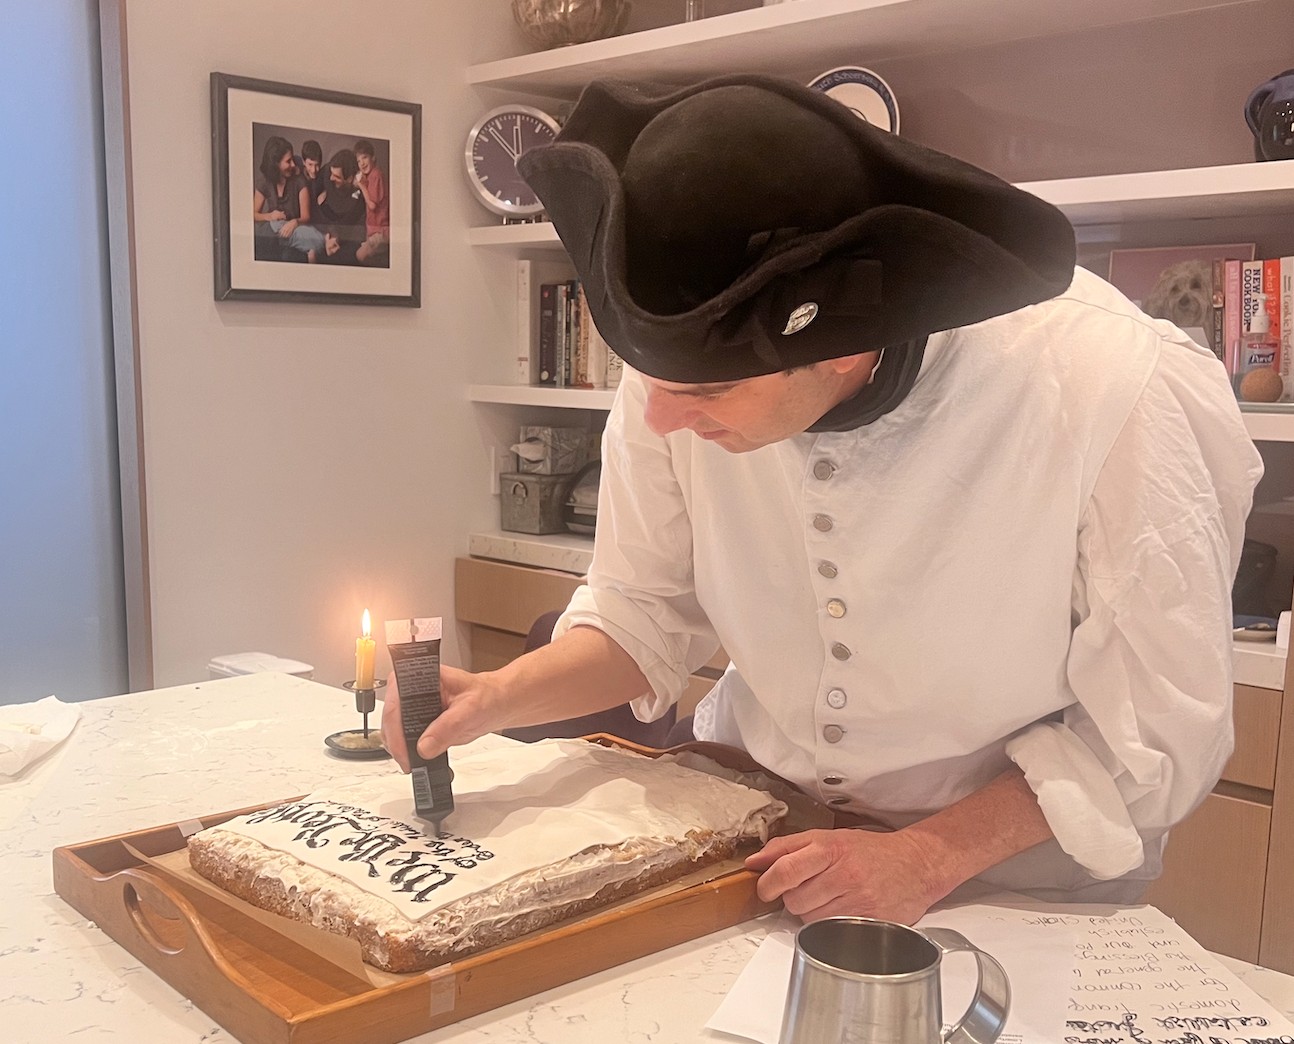 A man in traditional clothing lighting a candle on a rectangular cake at a kitchen table, with family photos and a clock in the background.